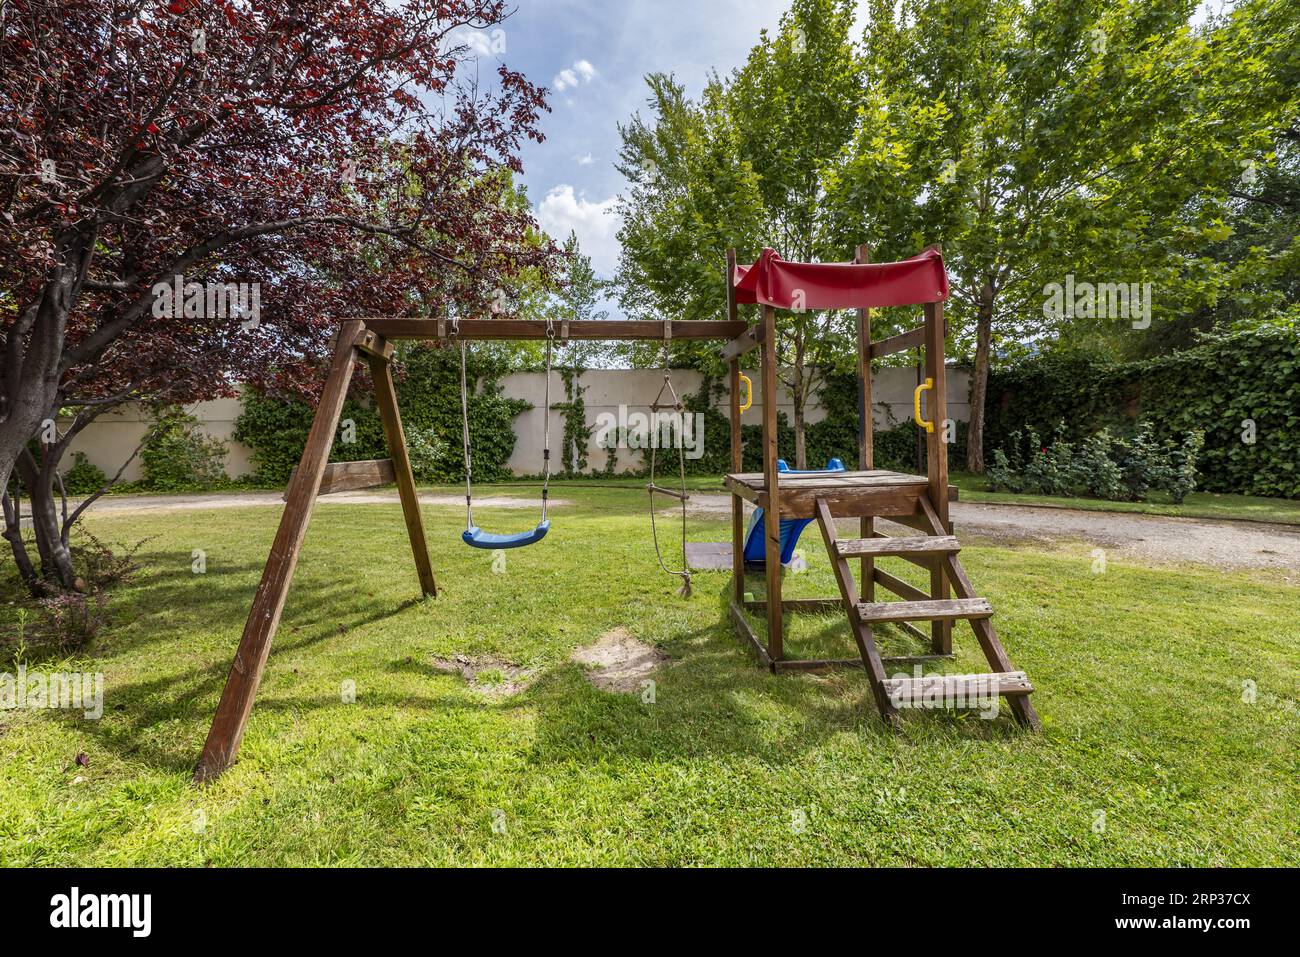 A wooden swing along with a slide on the grass of a garden in the common area of an urbanization Stock Photo